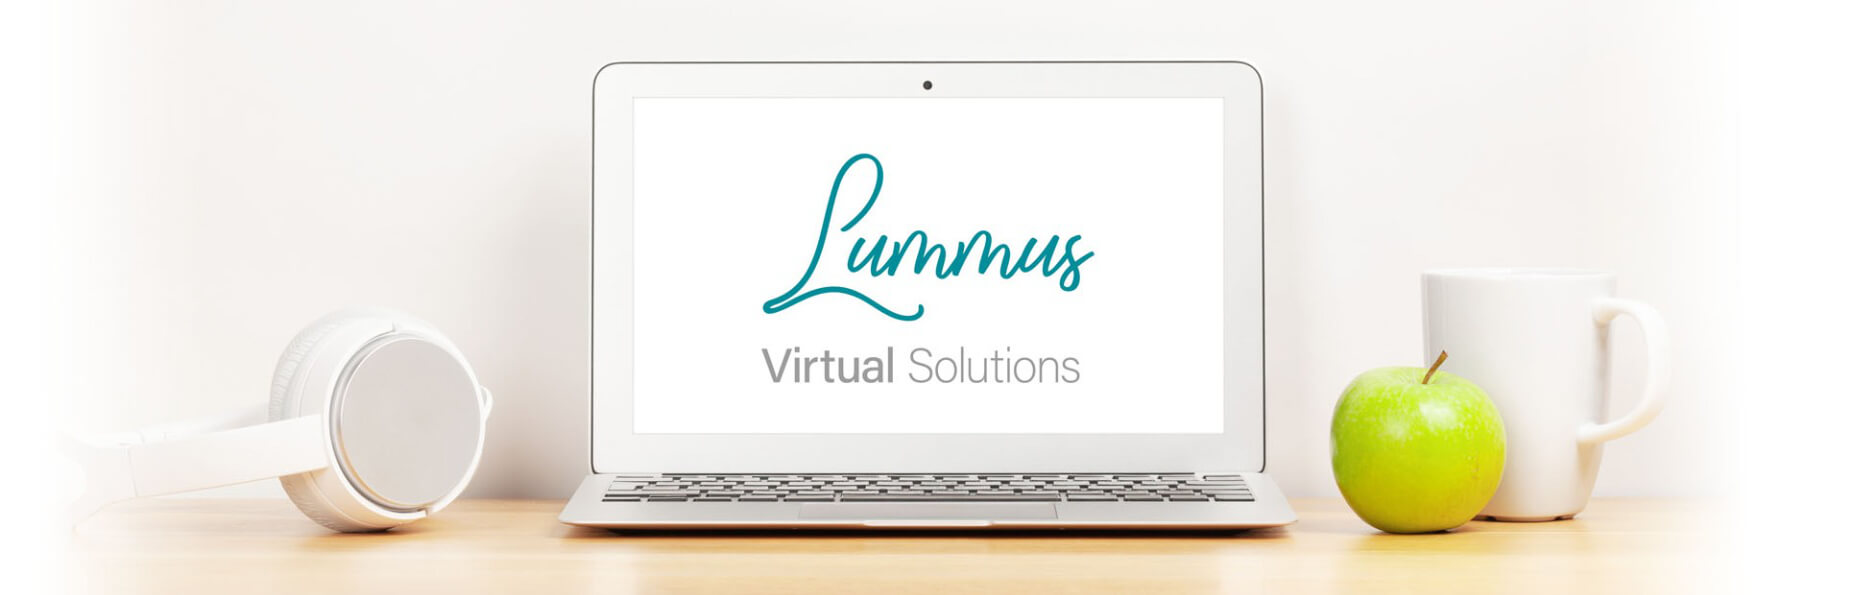 The logo of virtual assistant, Kerry Lummus on a laptop screen. Beside it is a mug, apple and a pair of headphones.. 